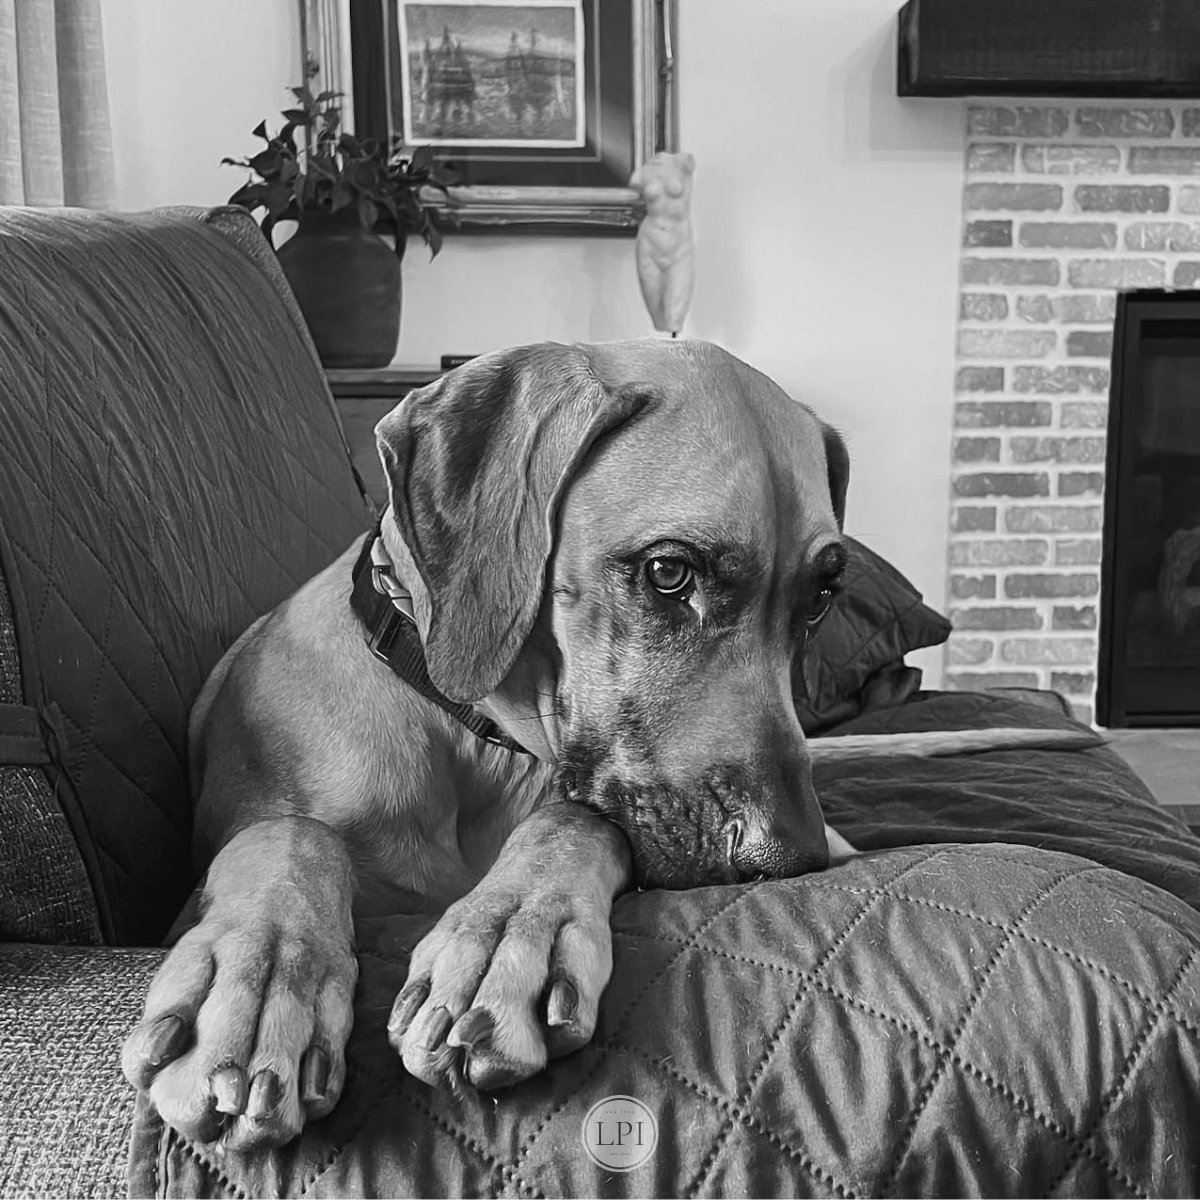 Pulling guard dog duty is hard, especially when there are so many soft spaces to relax.
.
.
.
.
.
.
.
.
.
#LuckyPearlInteriors #lpihomestead #family #Rhodesianridgeback